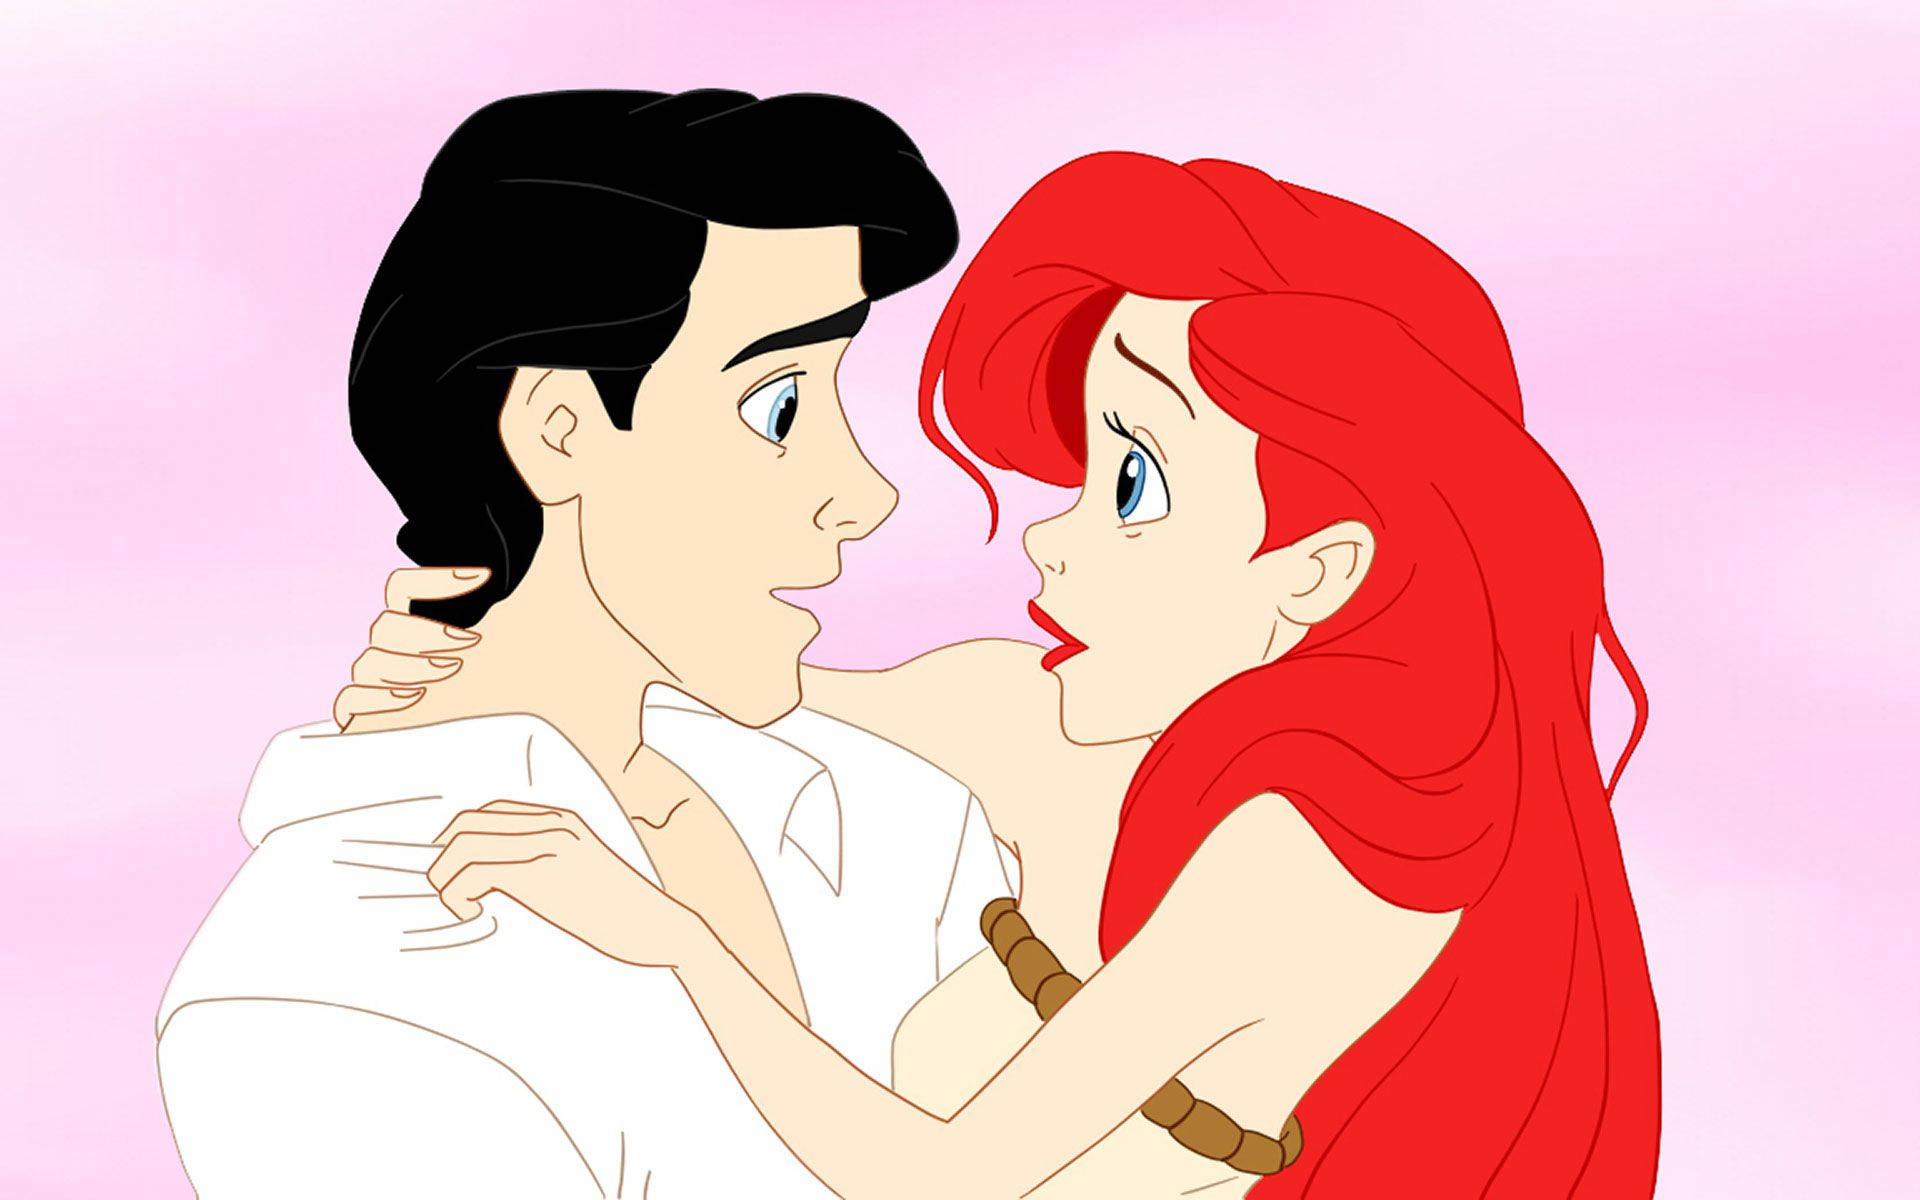 1920X1200 The Little Mermaid Wallpaper and Background